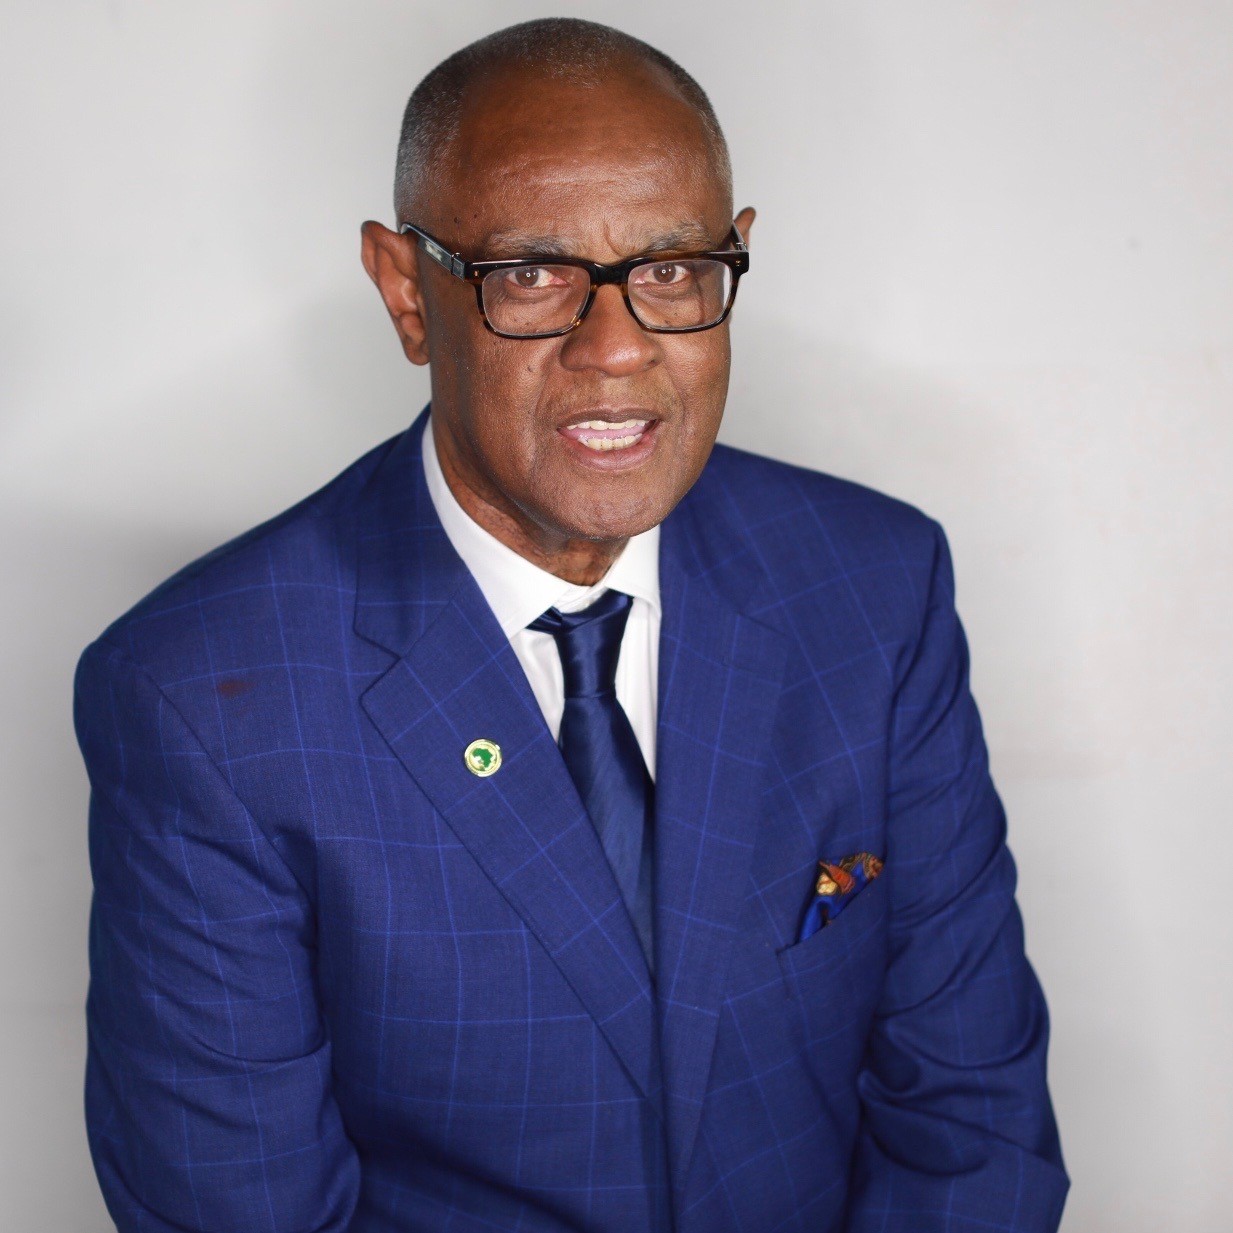 Melvin Foote is CEO & President of the Constituency for Africa